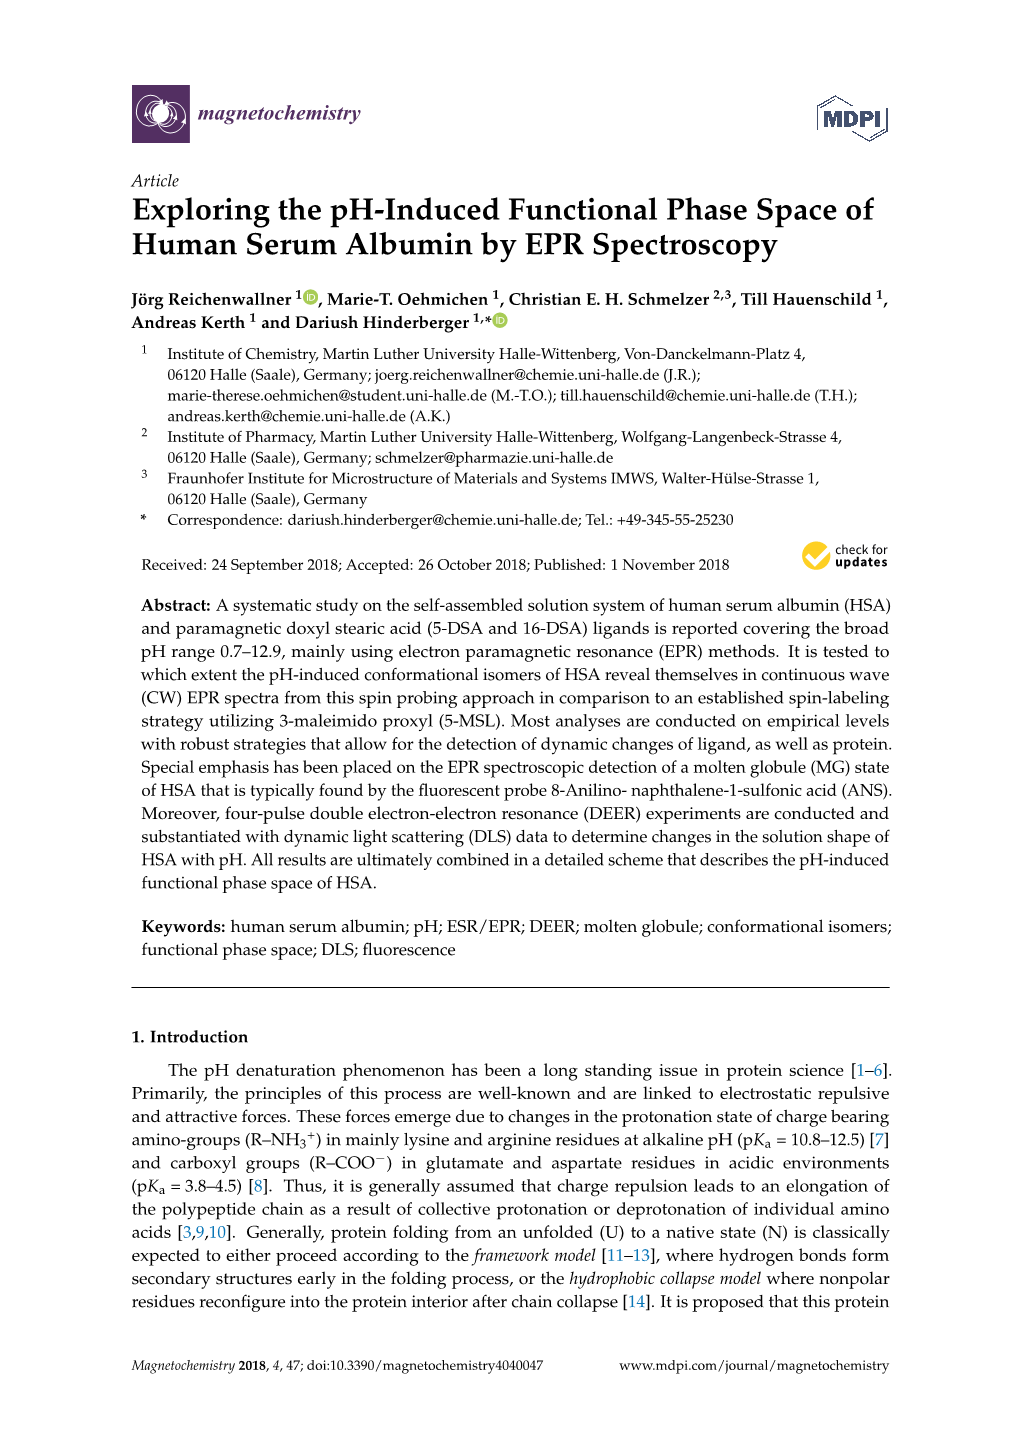 Exploring the Ph-Induced Functional Phase Space of Human Serum Albumin by EPR Spectroscopy